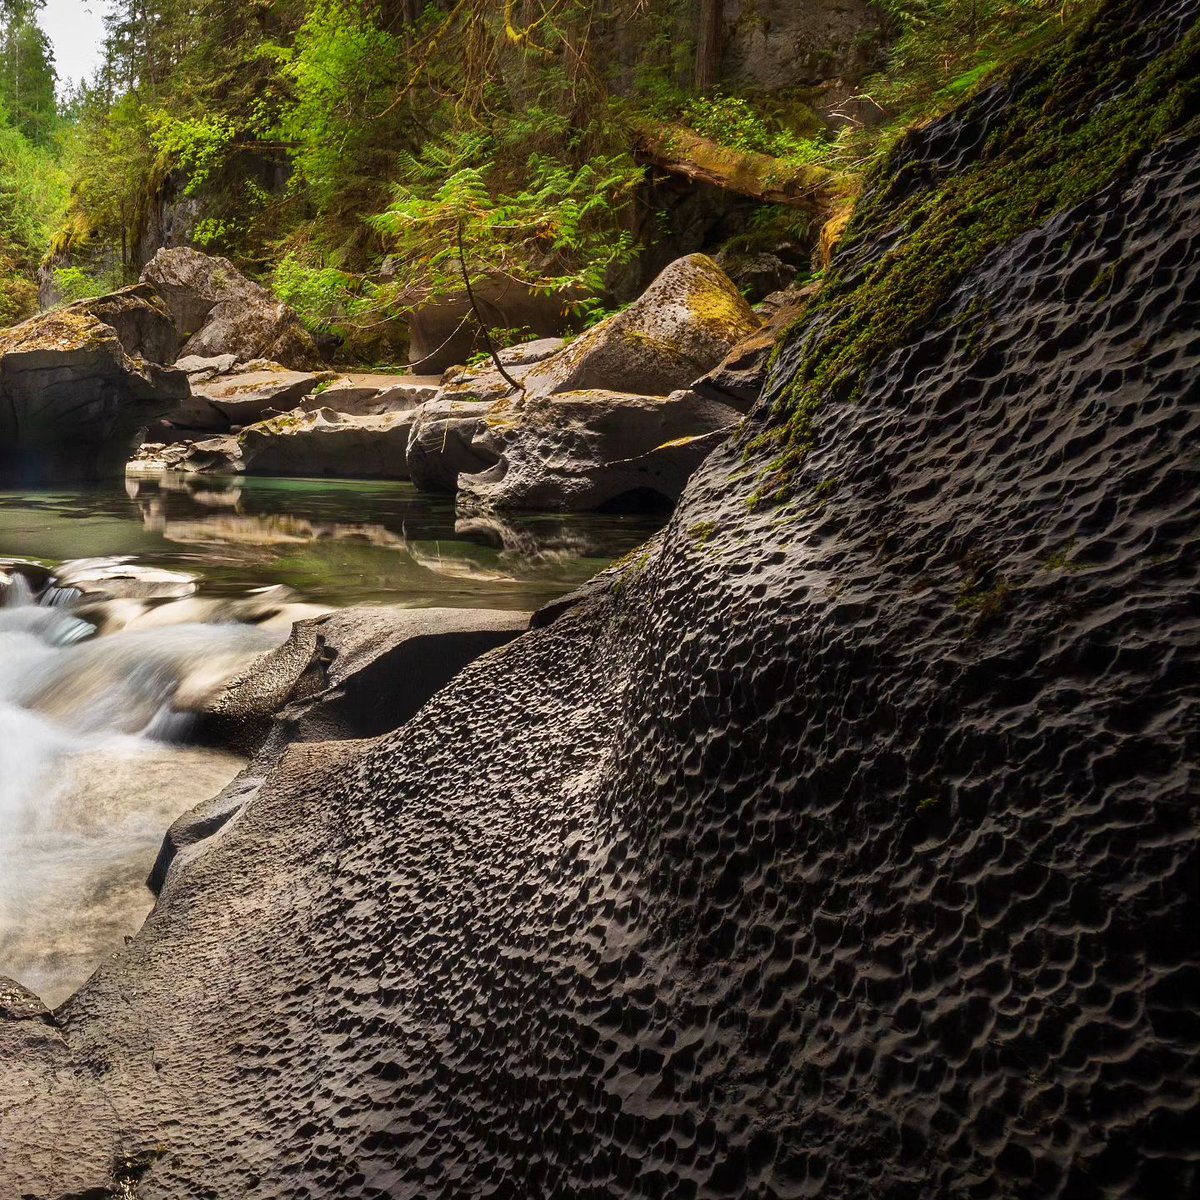 Tucked away in the scenic Nimpkish Valley, a mere 20-minute drive from the Island Highway awaits the enchanting Little Huson Caves Regional Park. Plan your trip: vancouverislandnorth.ca/stakeholder/li… 📸's martijn.laman via IG #GoNorthIsland #LeaveNoTrace